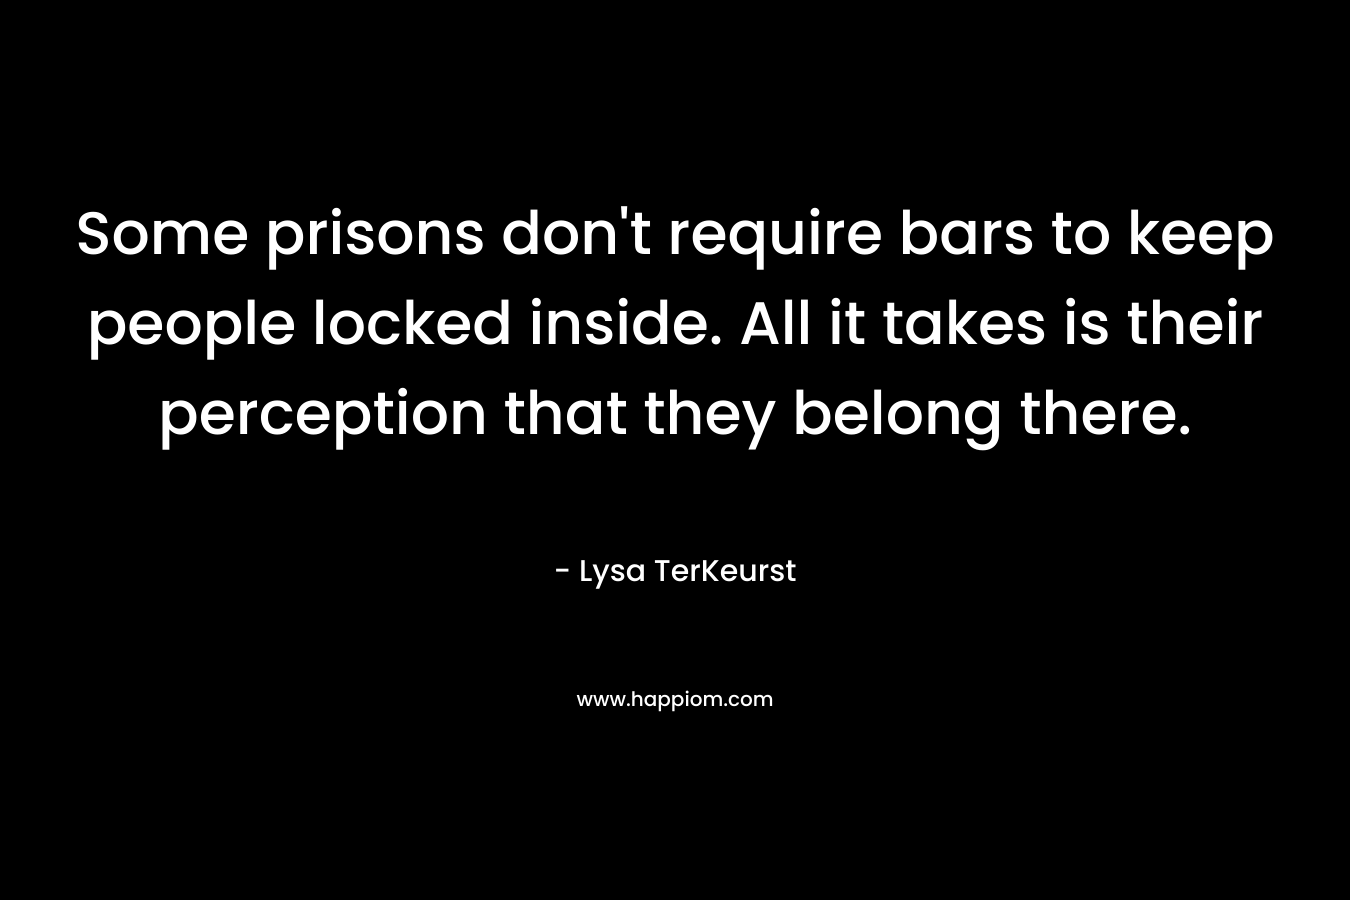 Some prisons don’t require bars to keep people locked inside. All it takes is their perception that they belong there. – Lysa TerKeurst